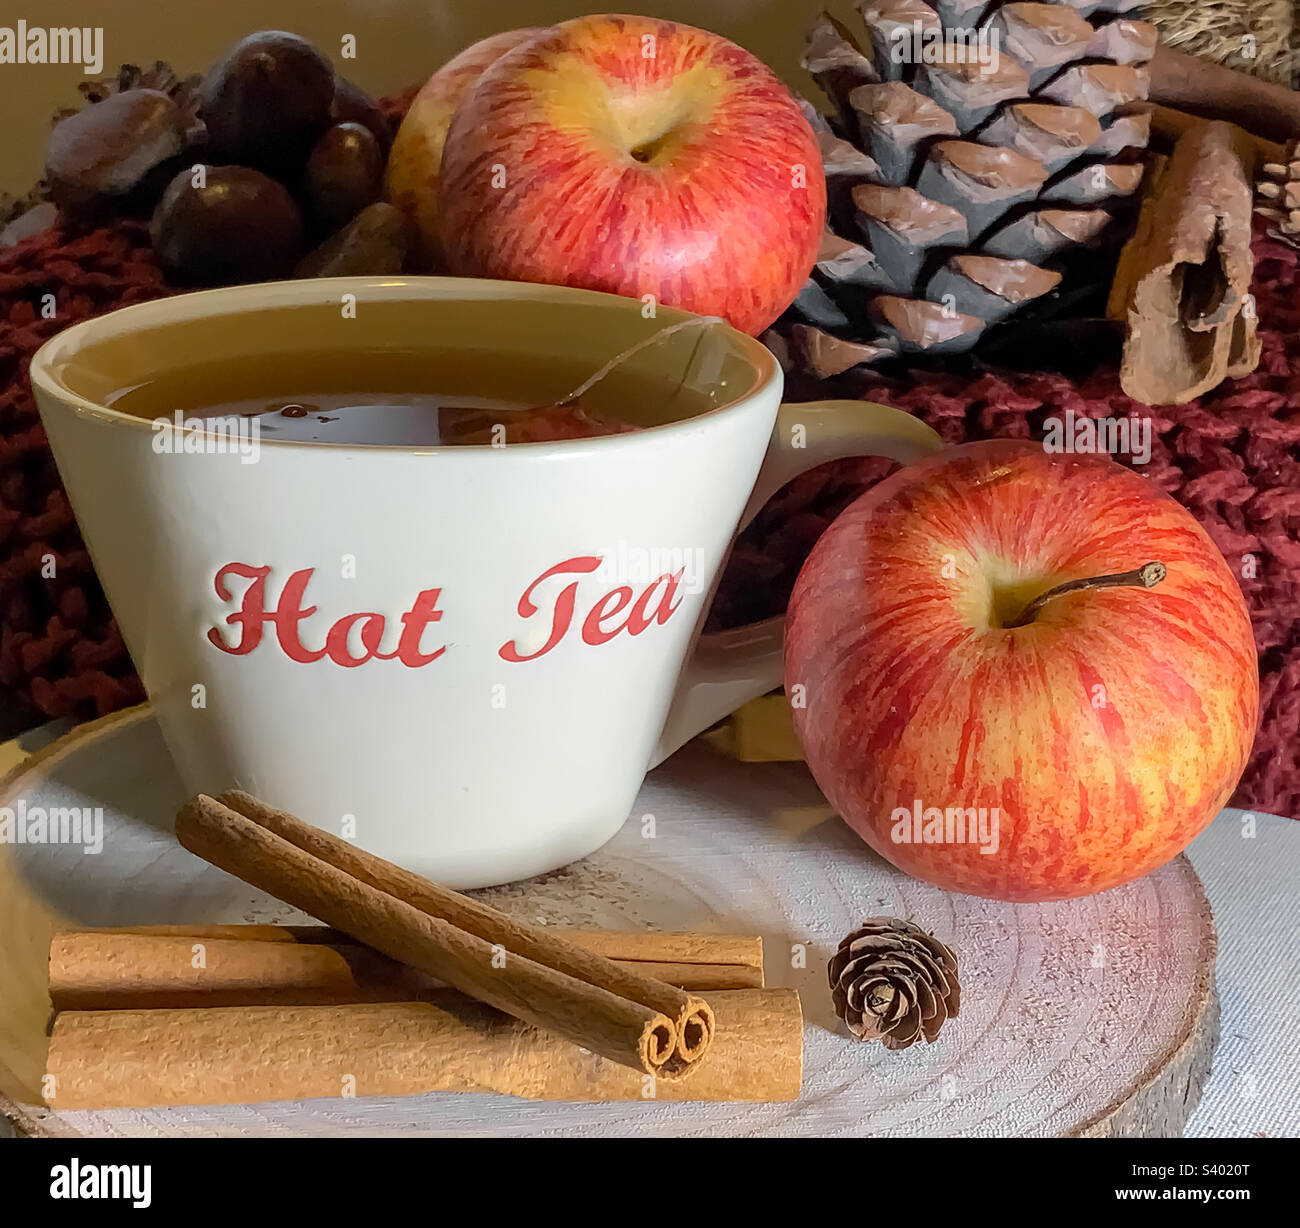 Apple & Cinnamon tea, shown with fruit, spice, pinecones and nuts on a wooden platter Stock Photo